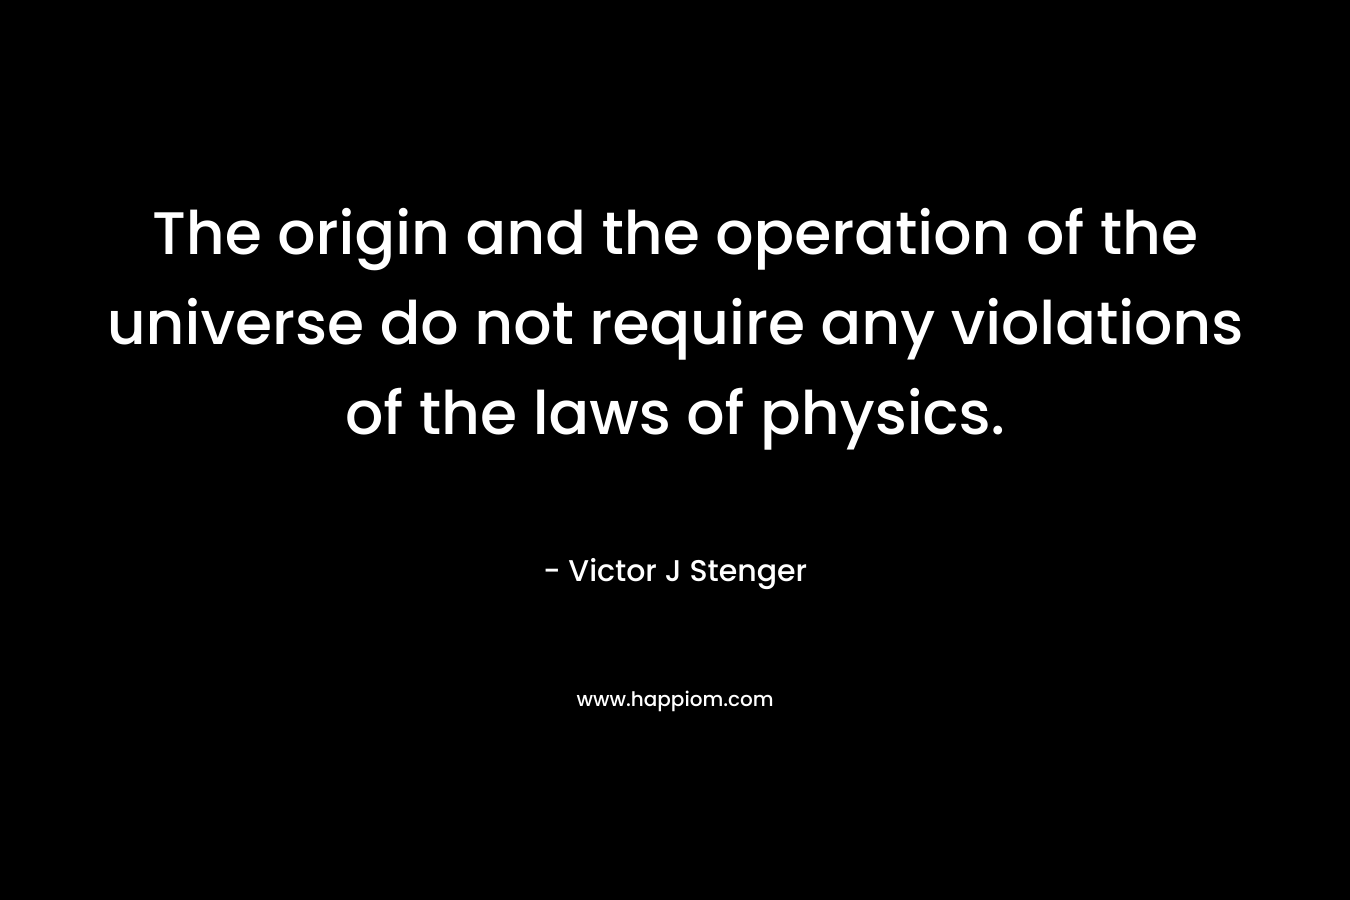 The origin and the operation of the universe do not require any violations of the laws of physics.